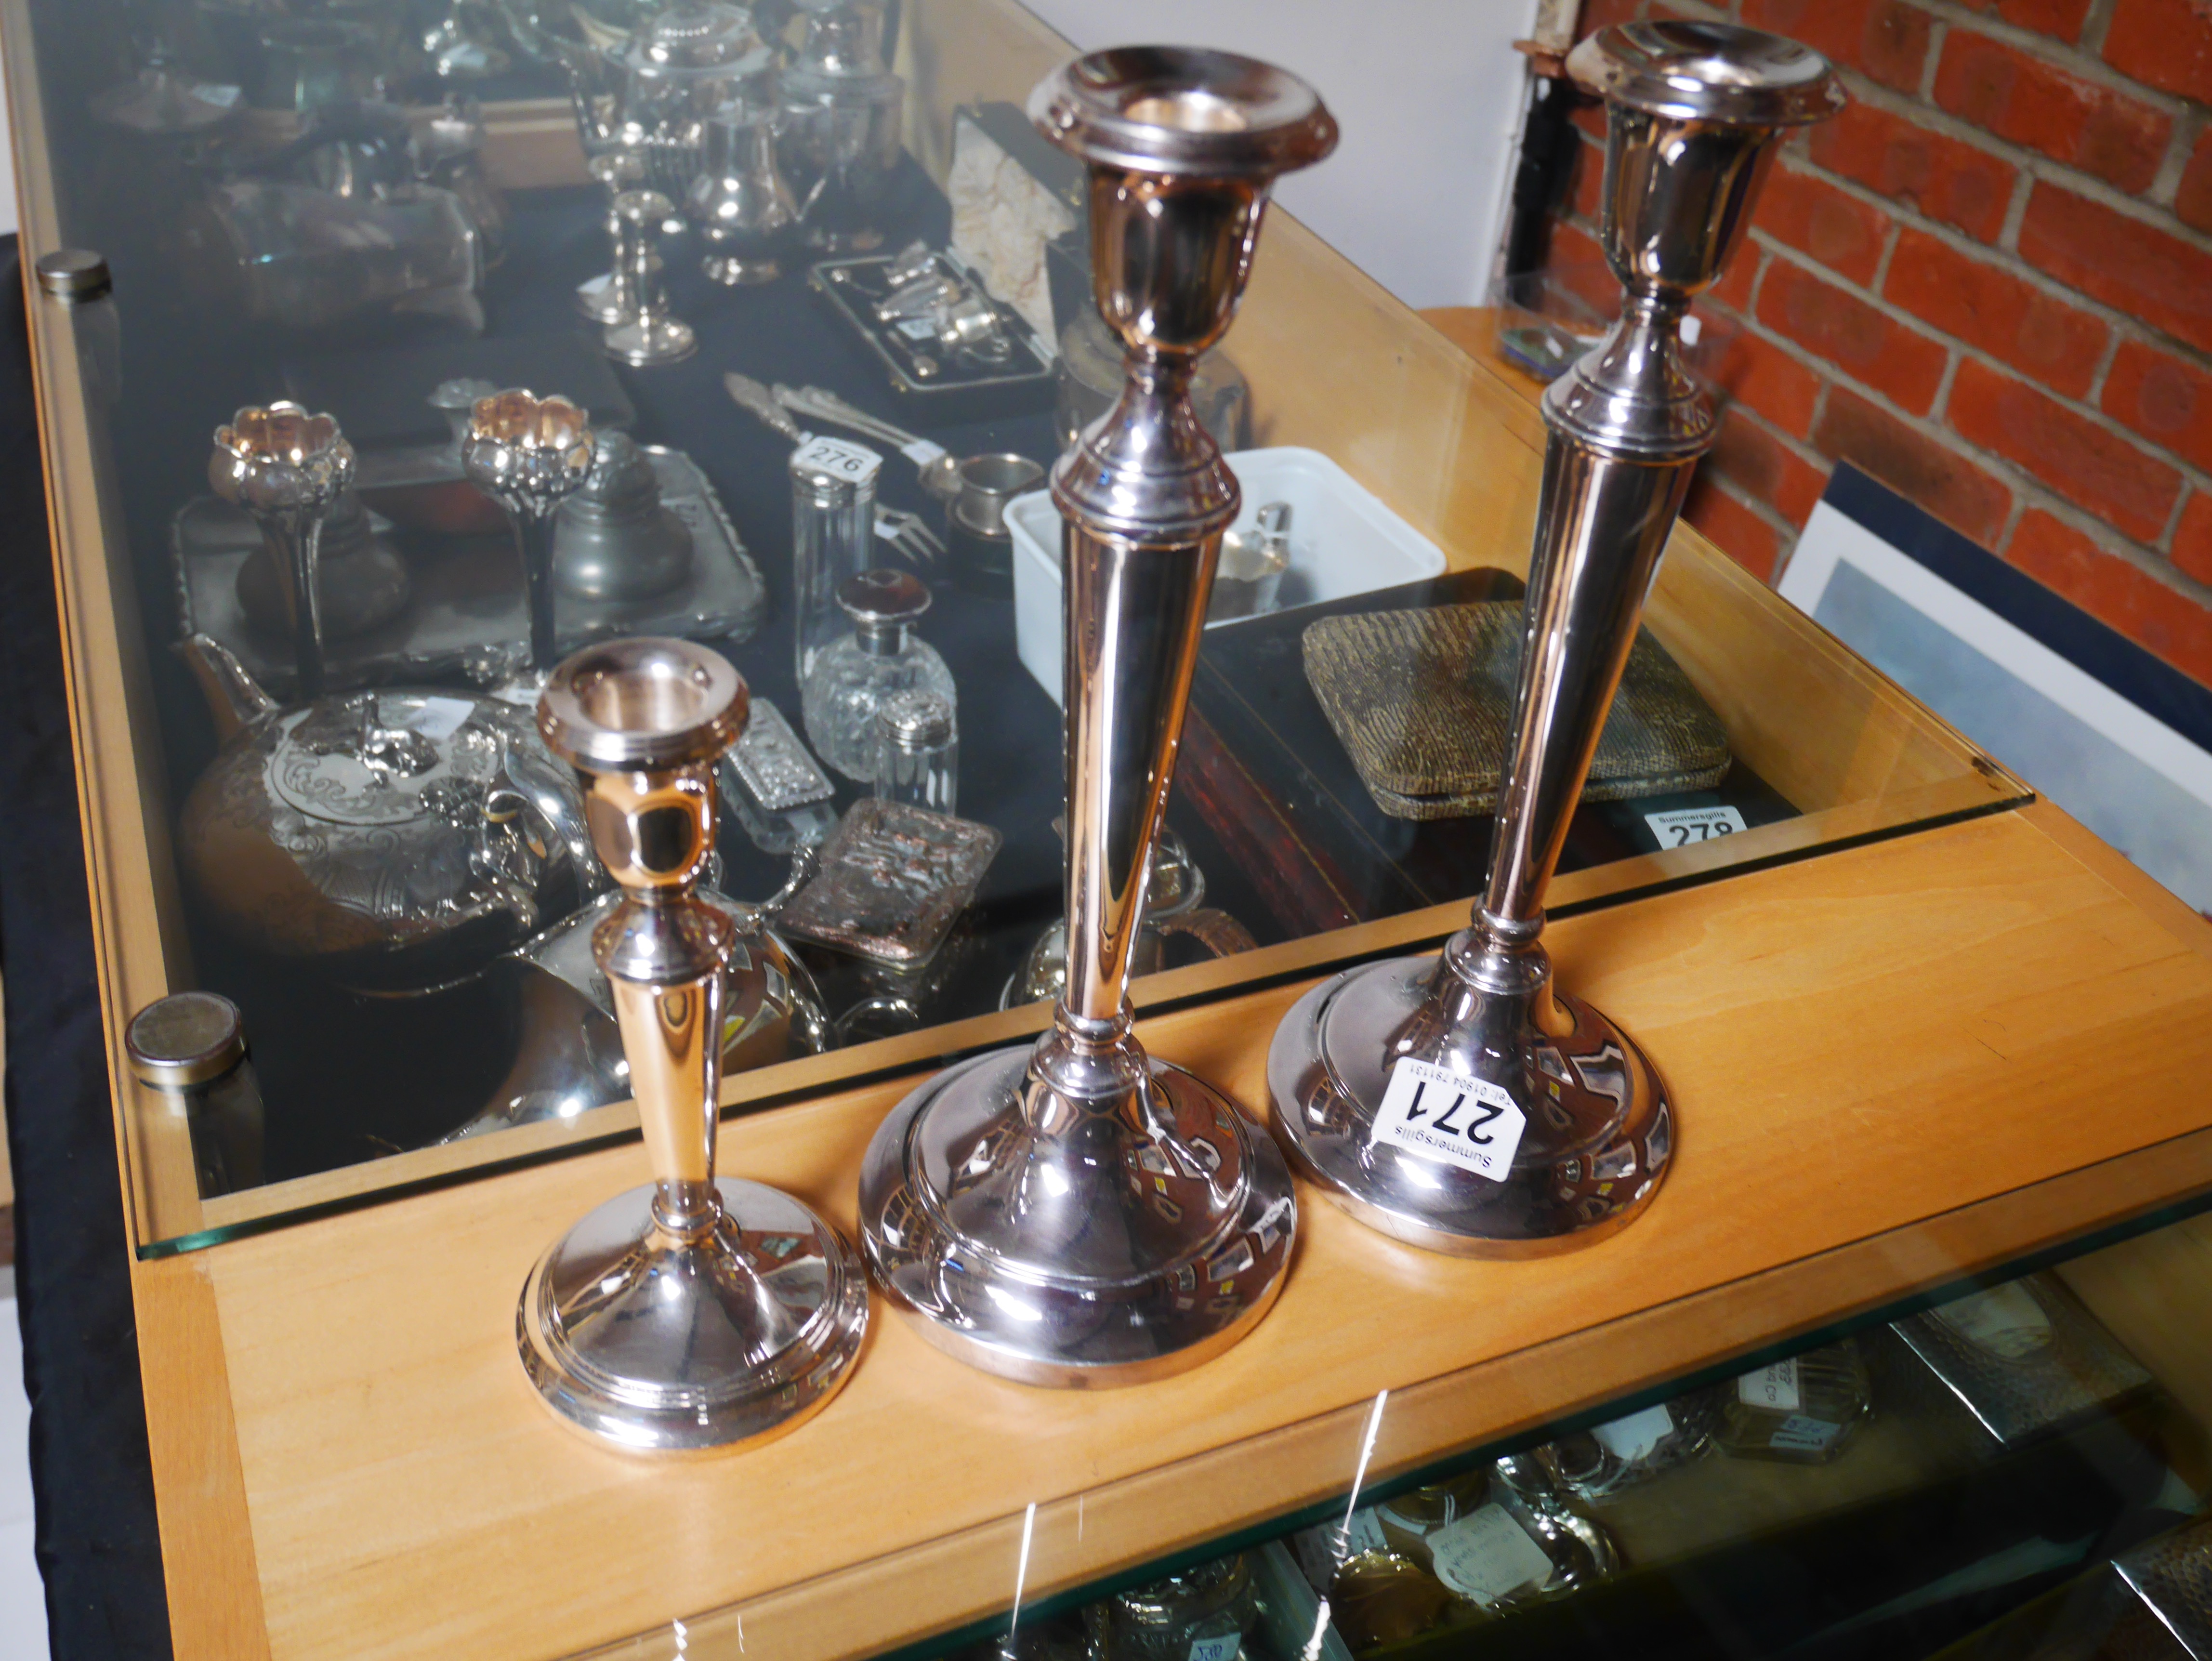 Pair of plated candlesticks and Silver candlestick